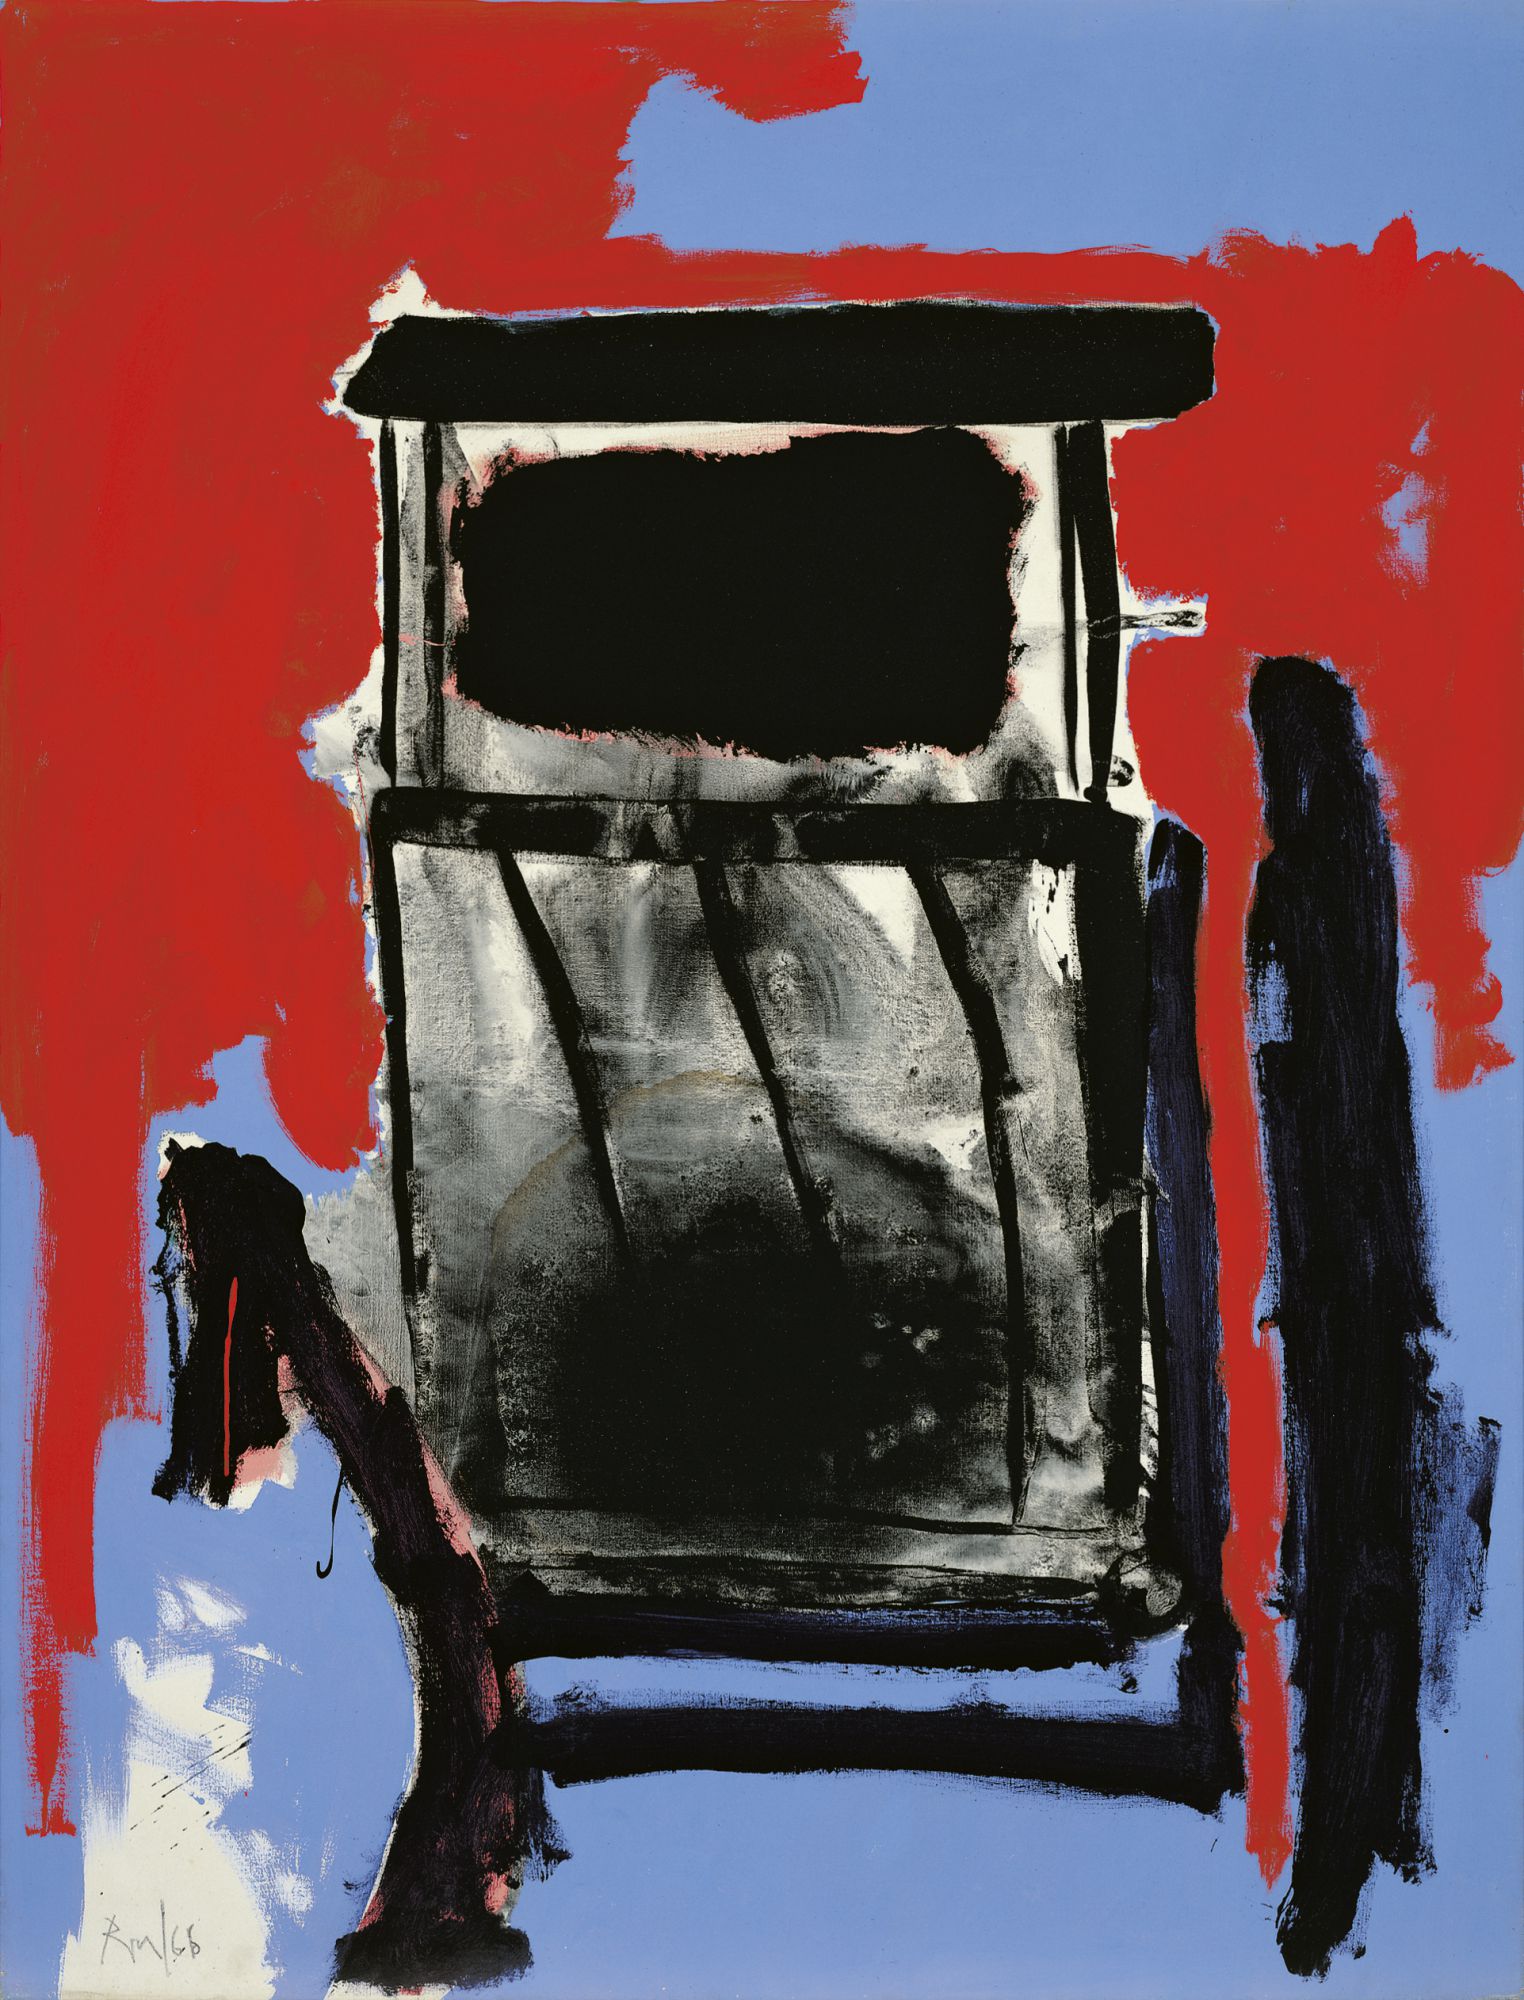 Guillotine, 1981, oil and acrylic on canvas, 66 ✕ 50 in. (167.6 ✕ 127 cm)